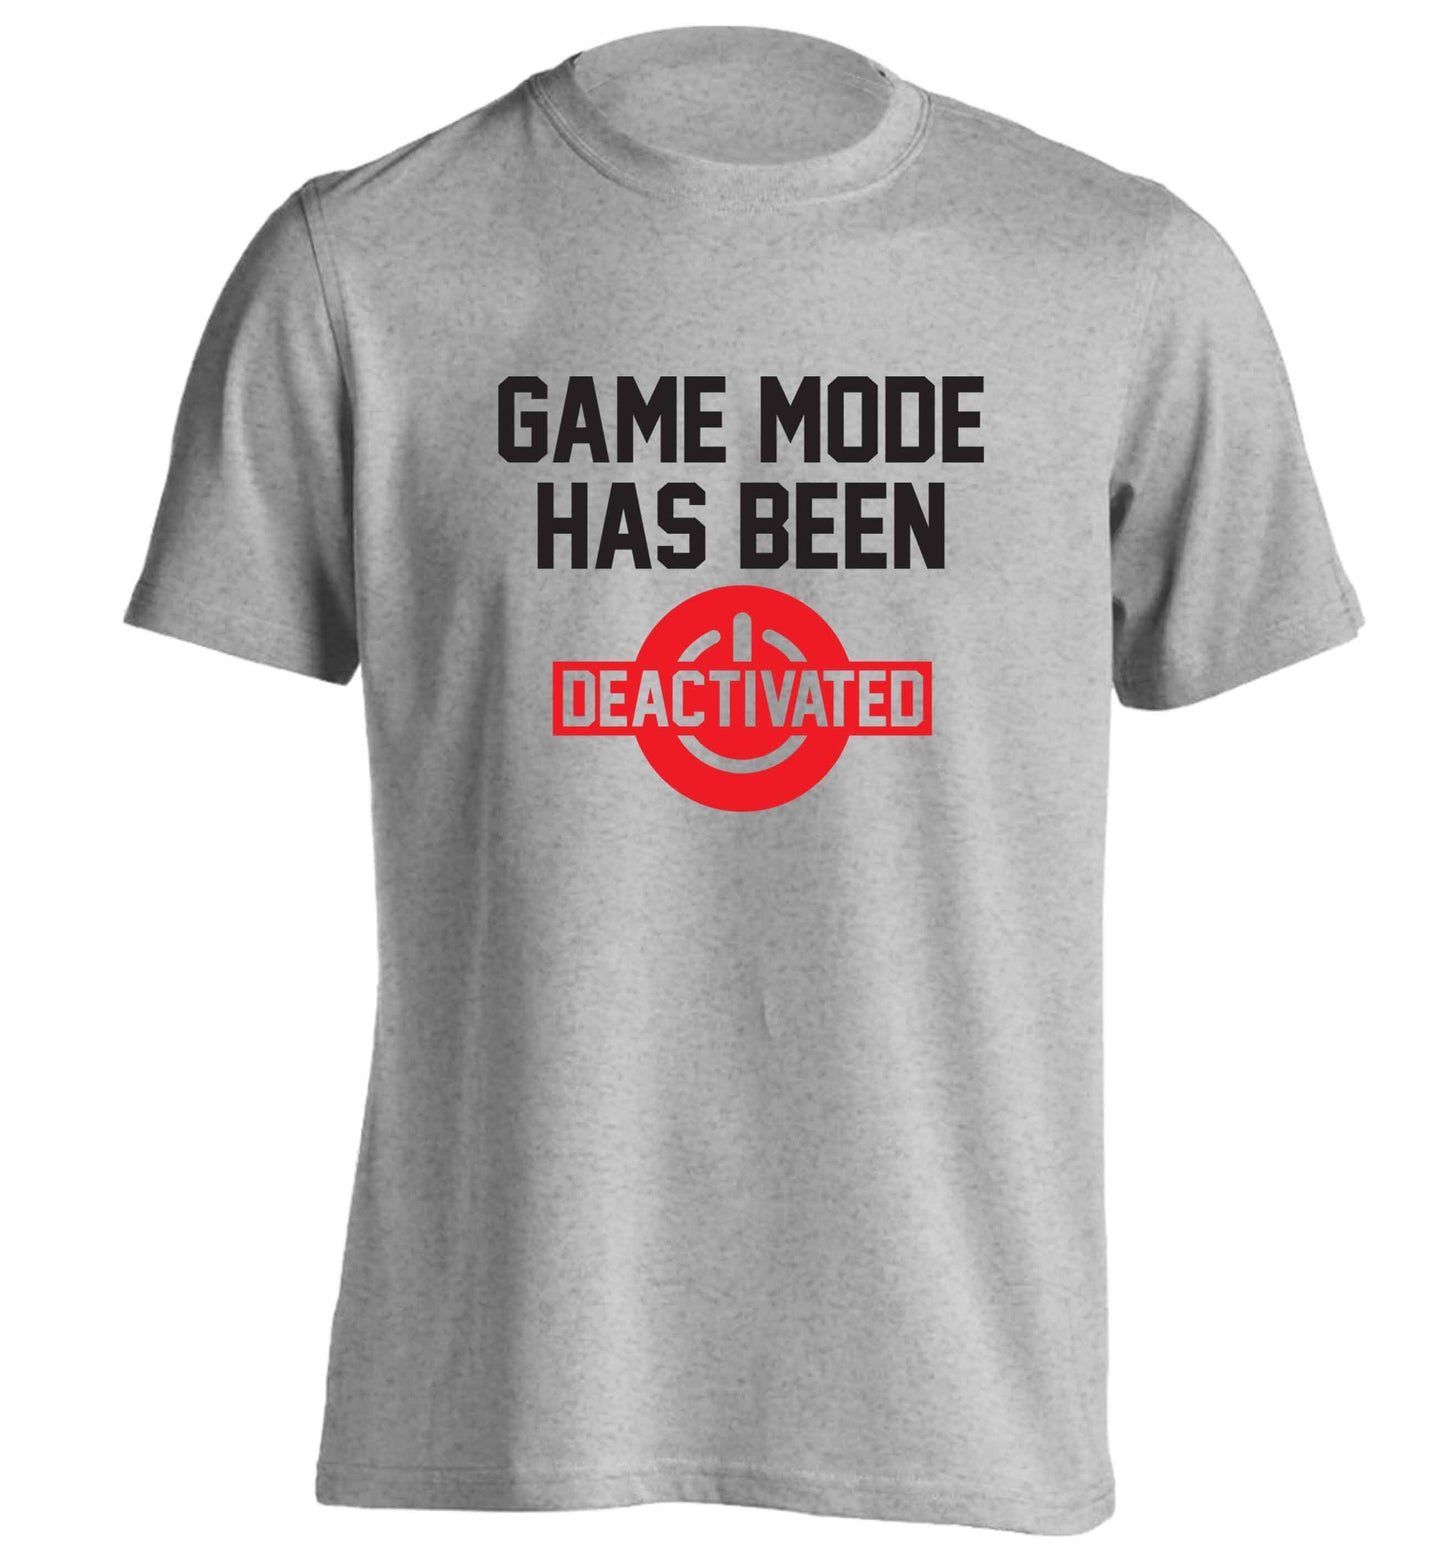 Game Mode Has Been Deactivated adults unisex grey Tshirt 2XL